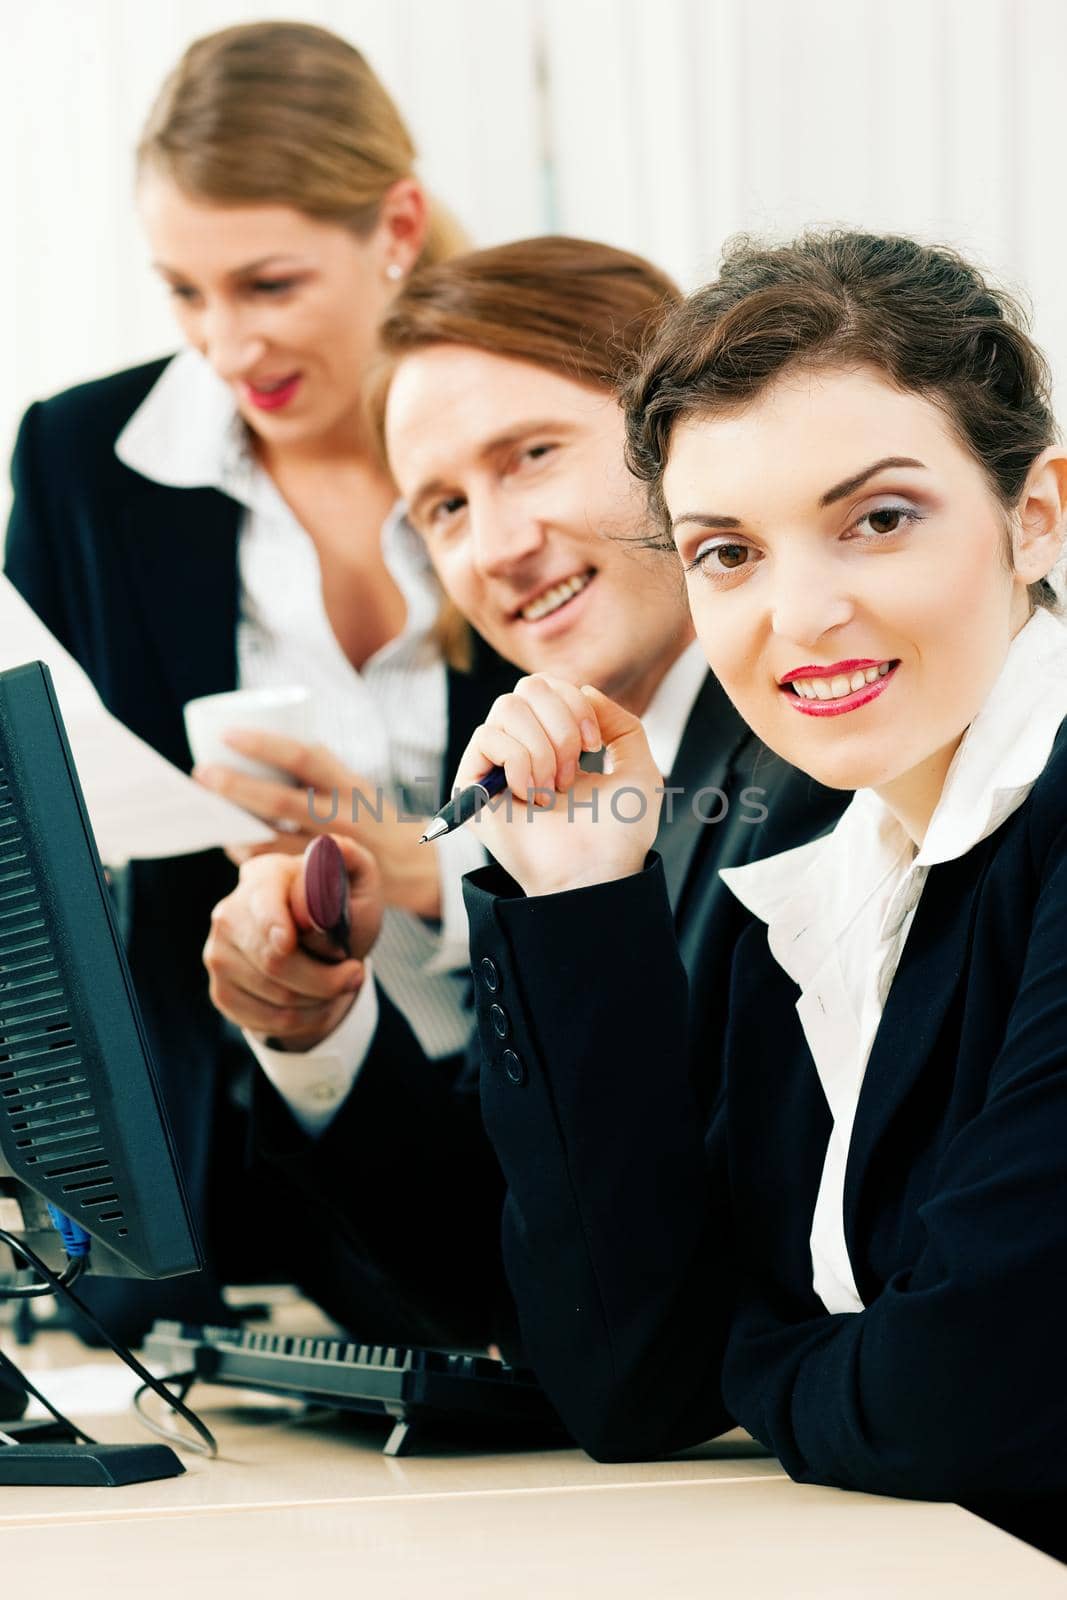 Small business team - man and two women - working in the office looking on a computer screen, one woman drinking a mug of coffee